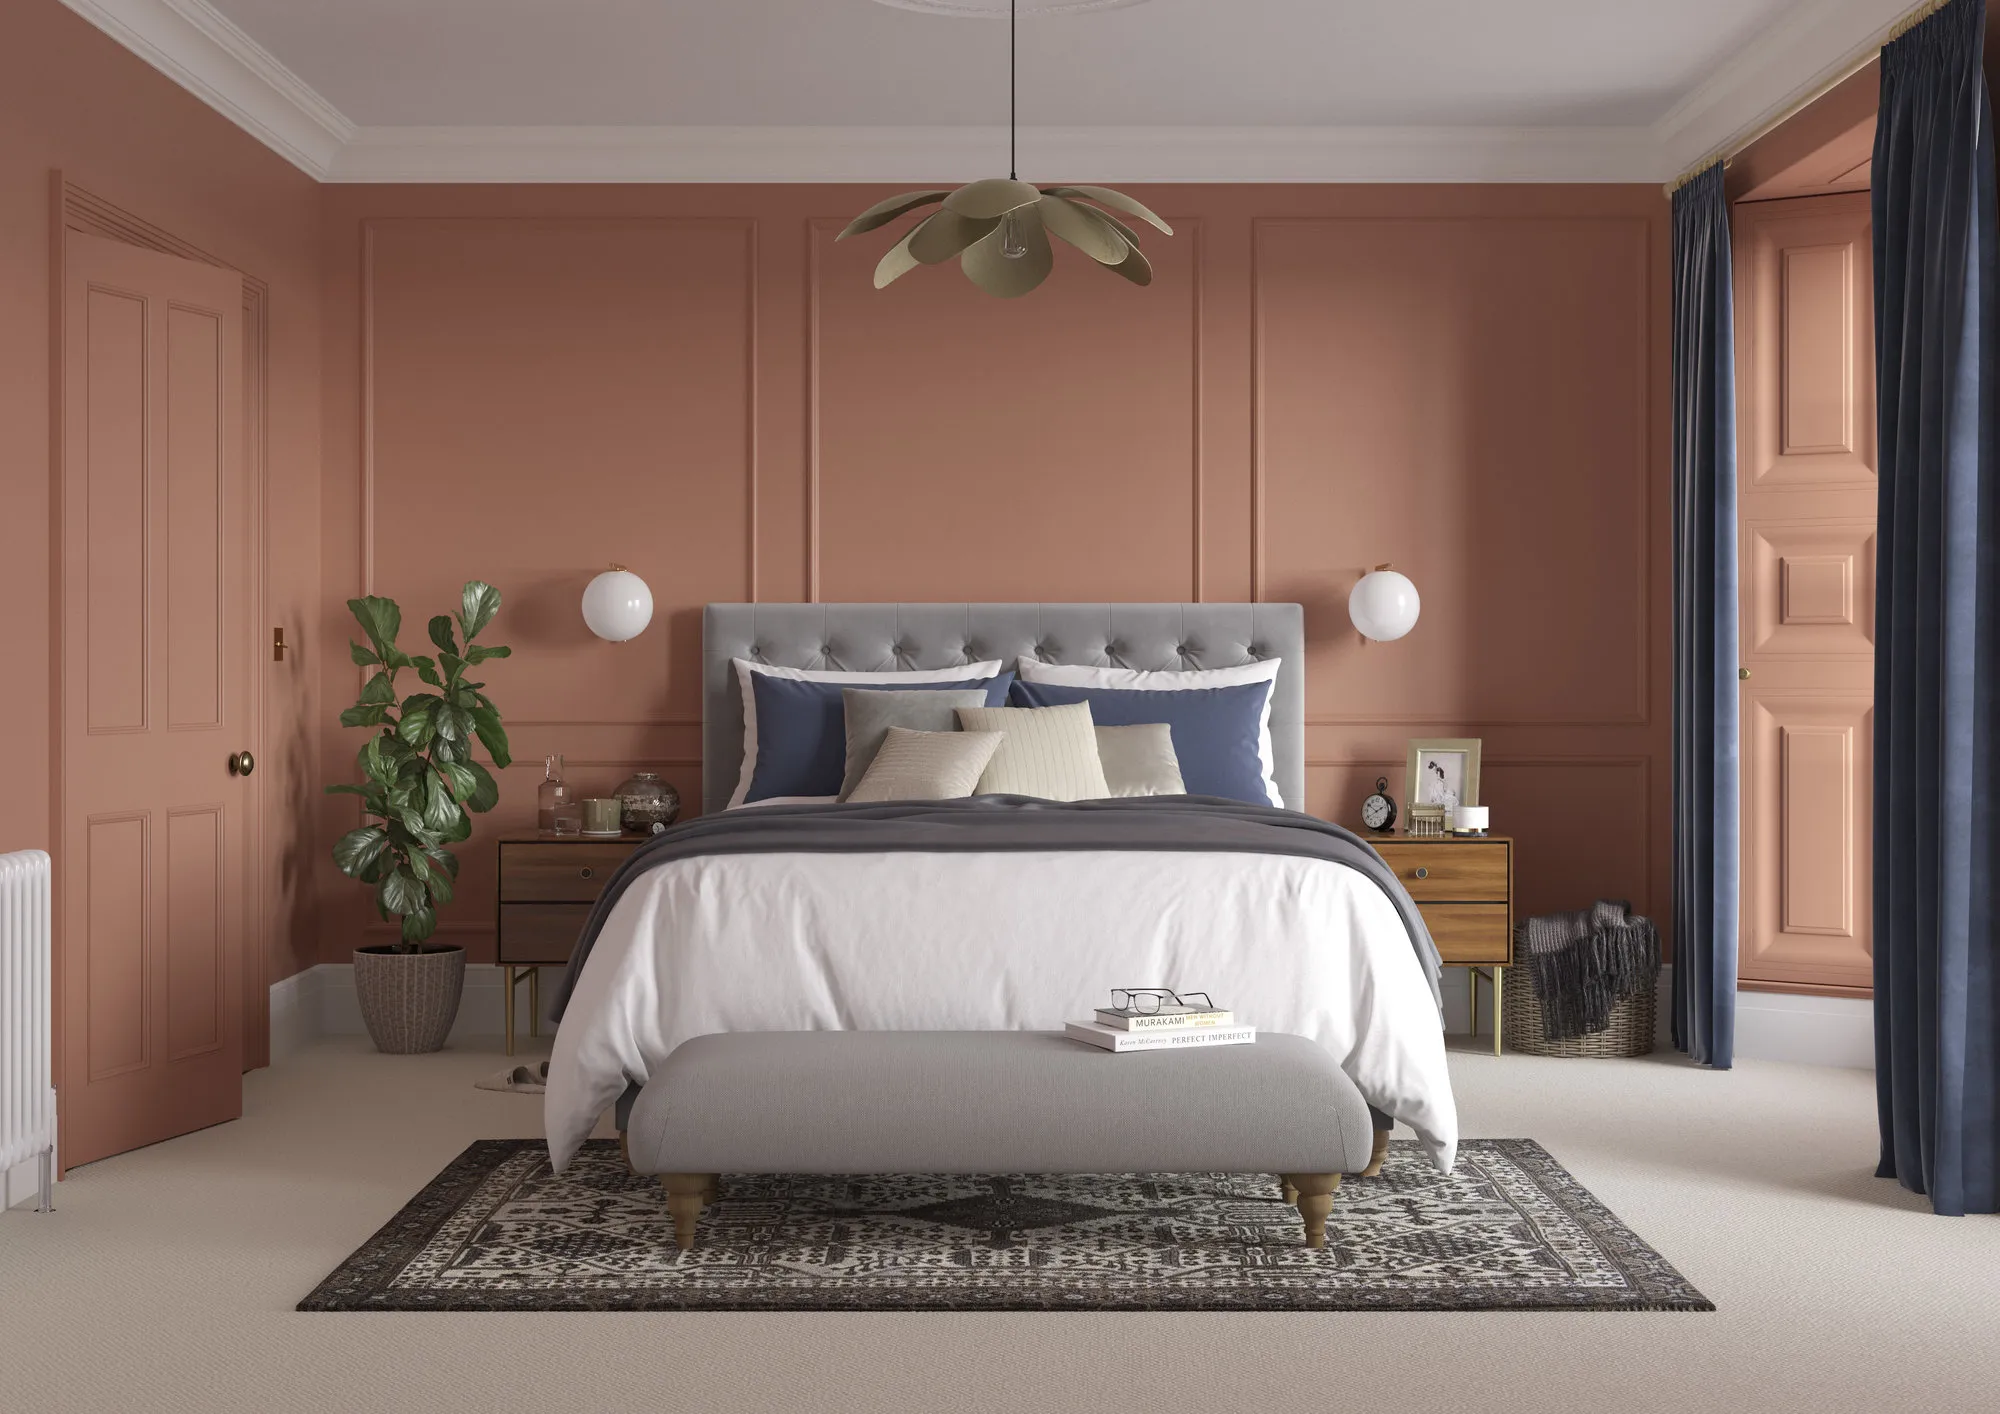 1. Neutral shades like beige or light pink - wide 3